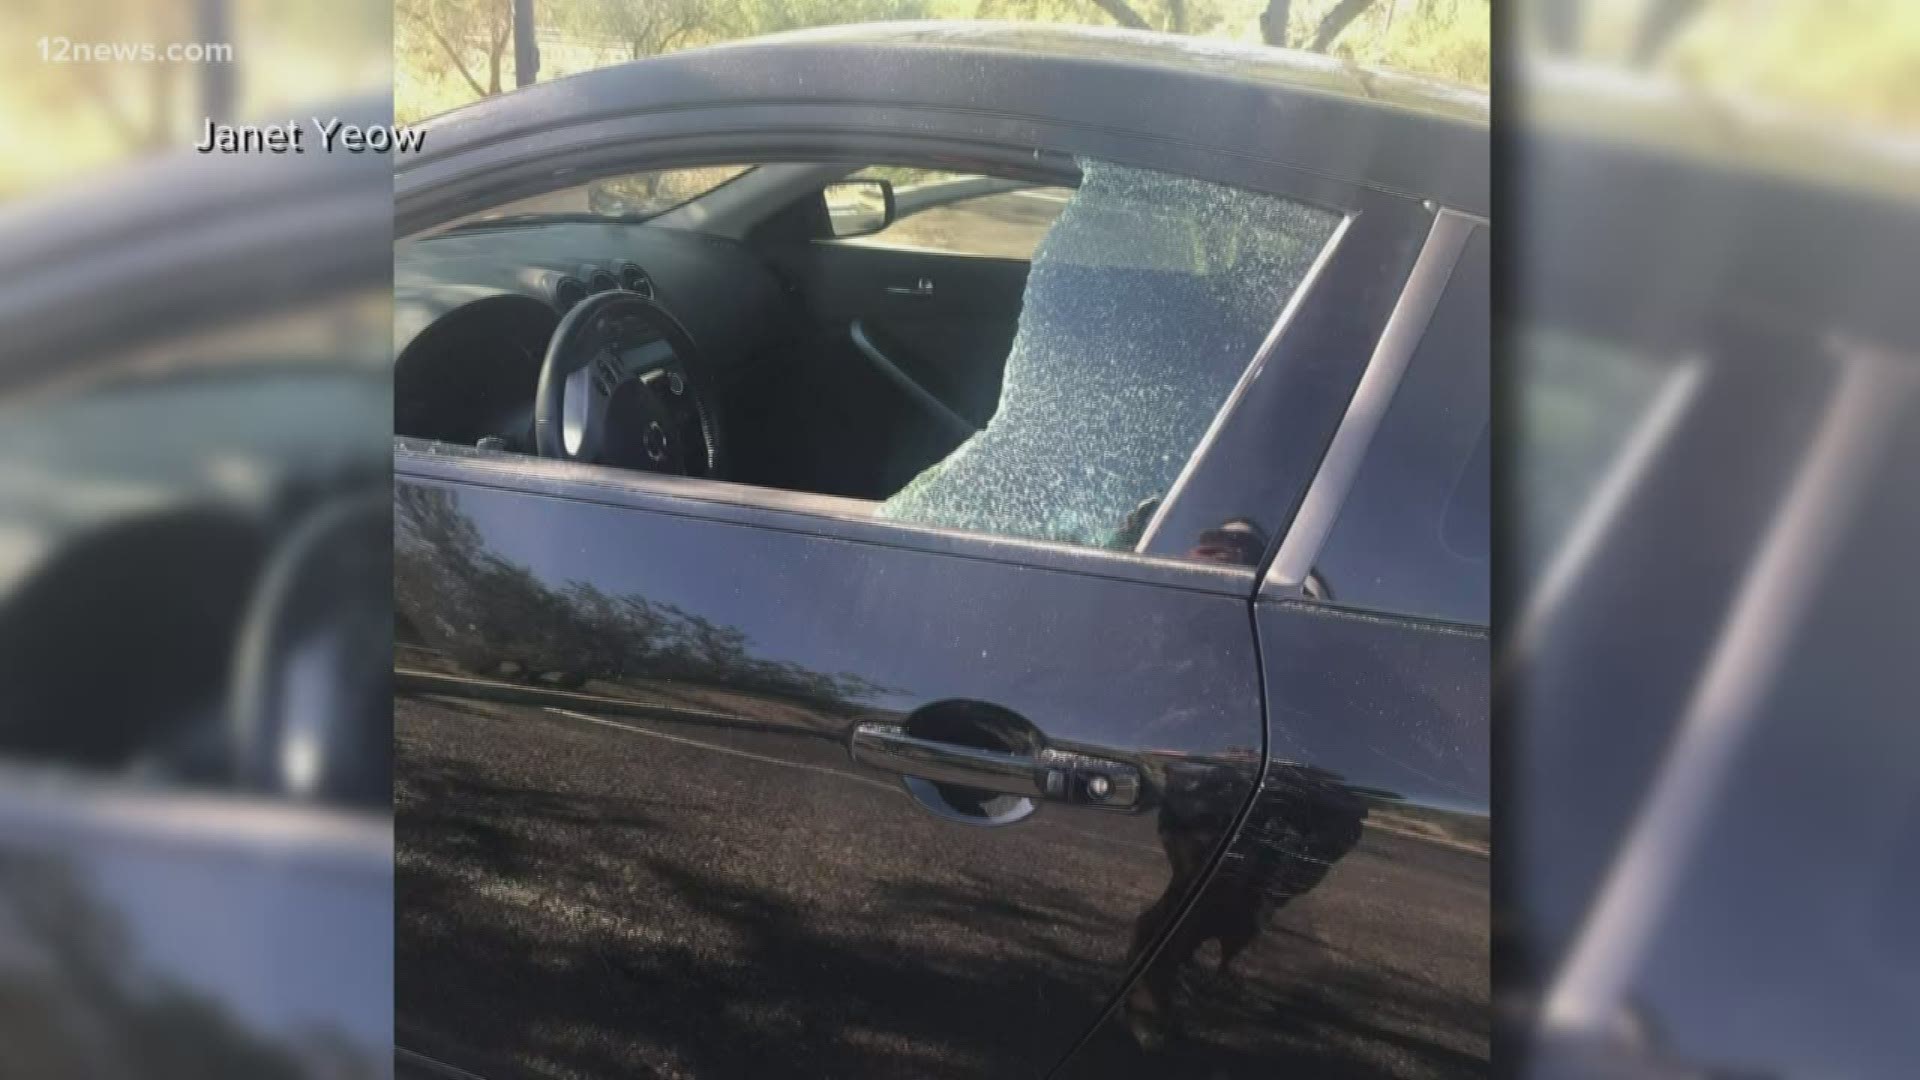 A broken window and about a thousand dollars charged on her credit cards. That's what a Valley woman is dealing with after a run on North Mountain.